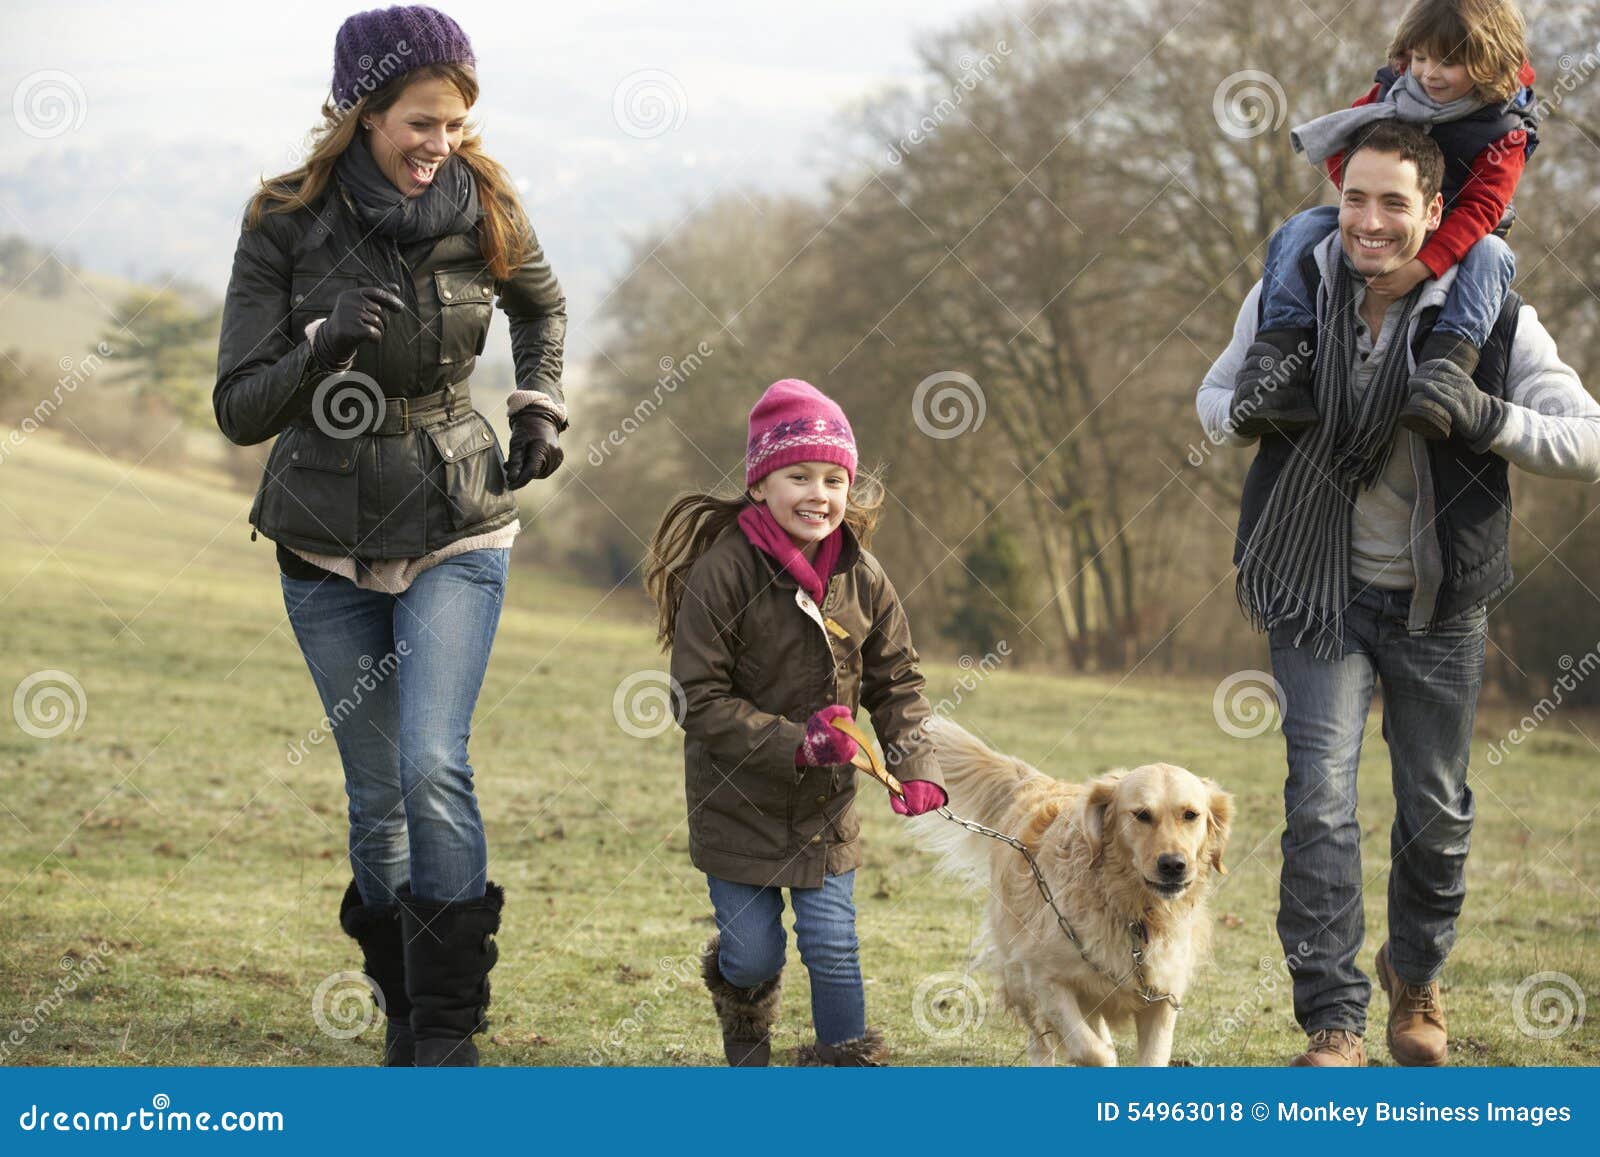 family and dog on country walk in winter